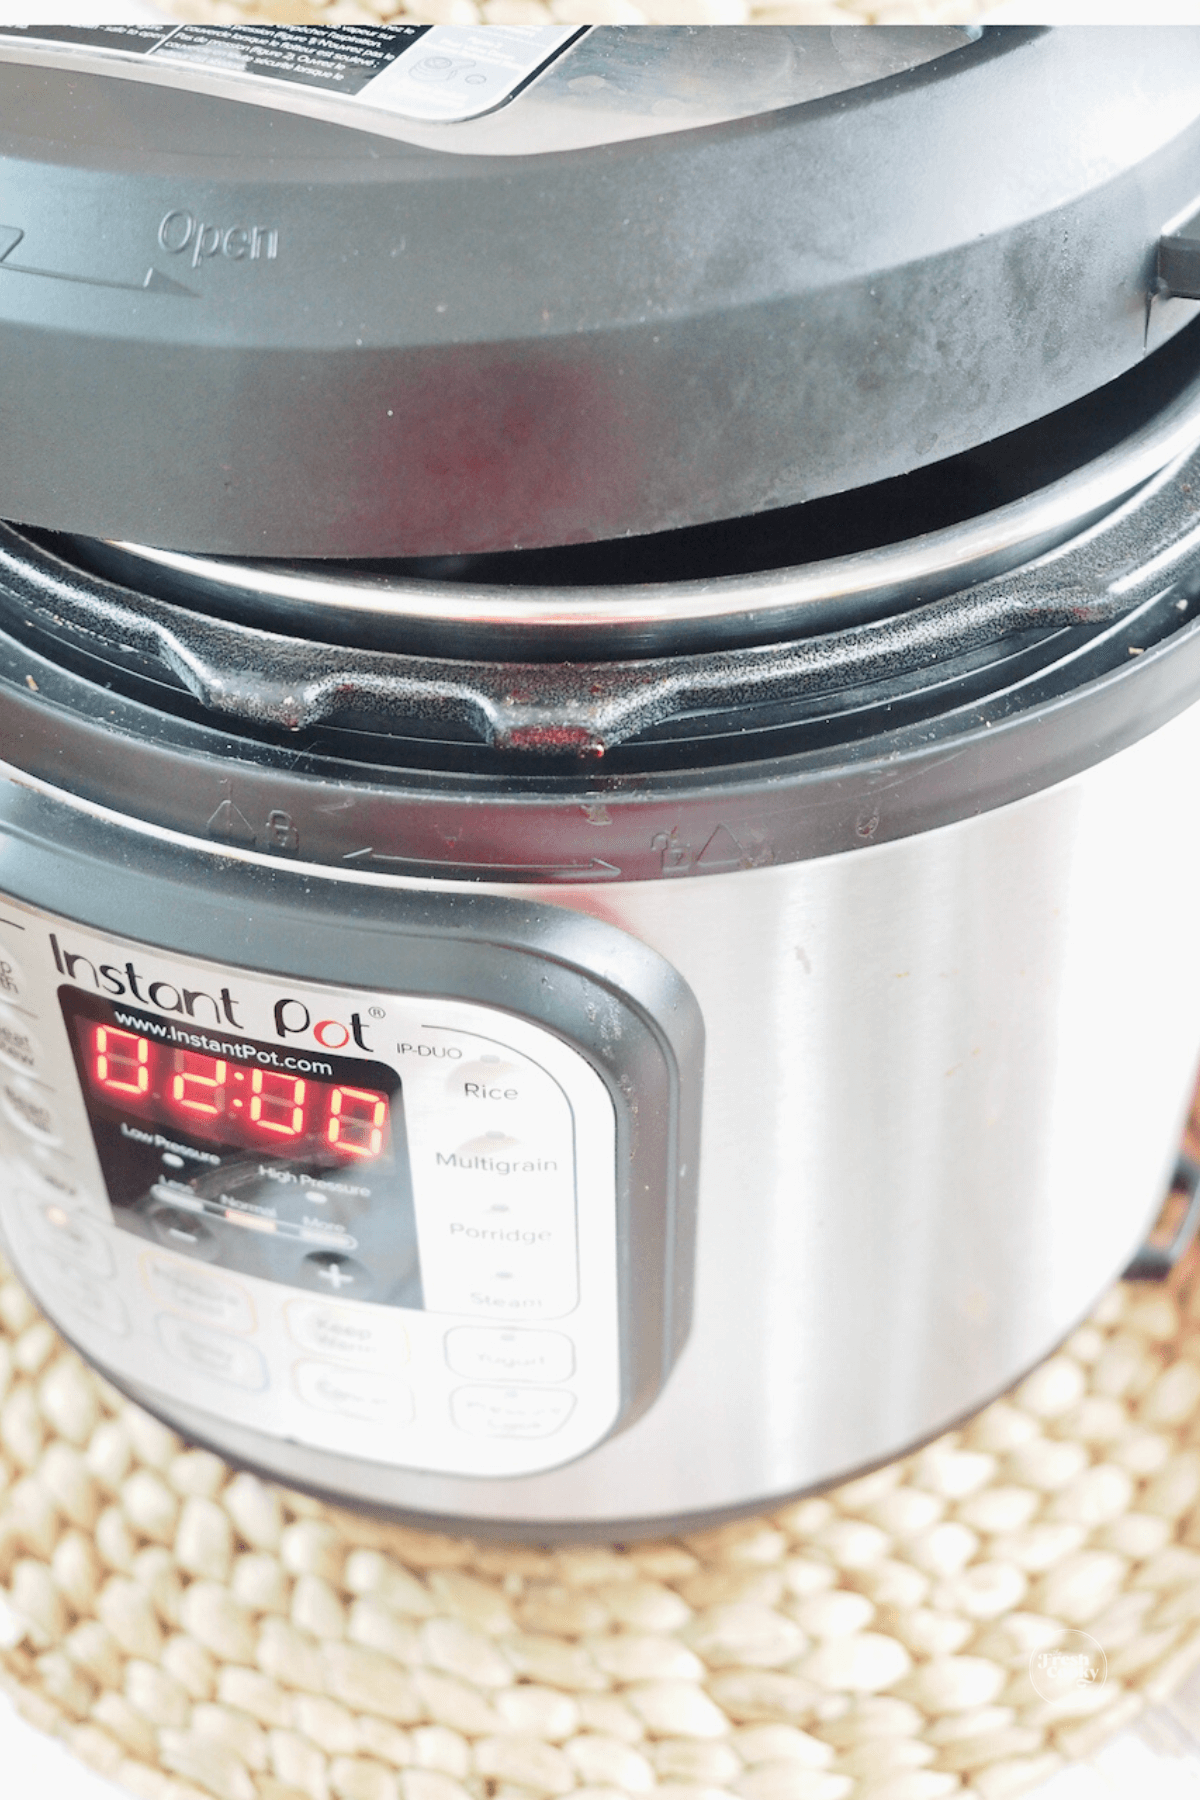 Instant pot on 2 hour slow cooker high setting.